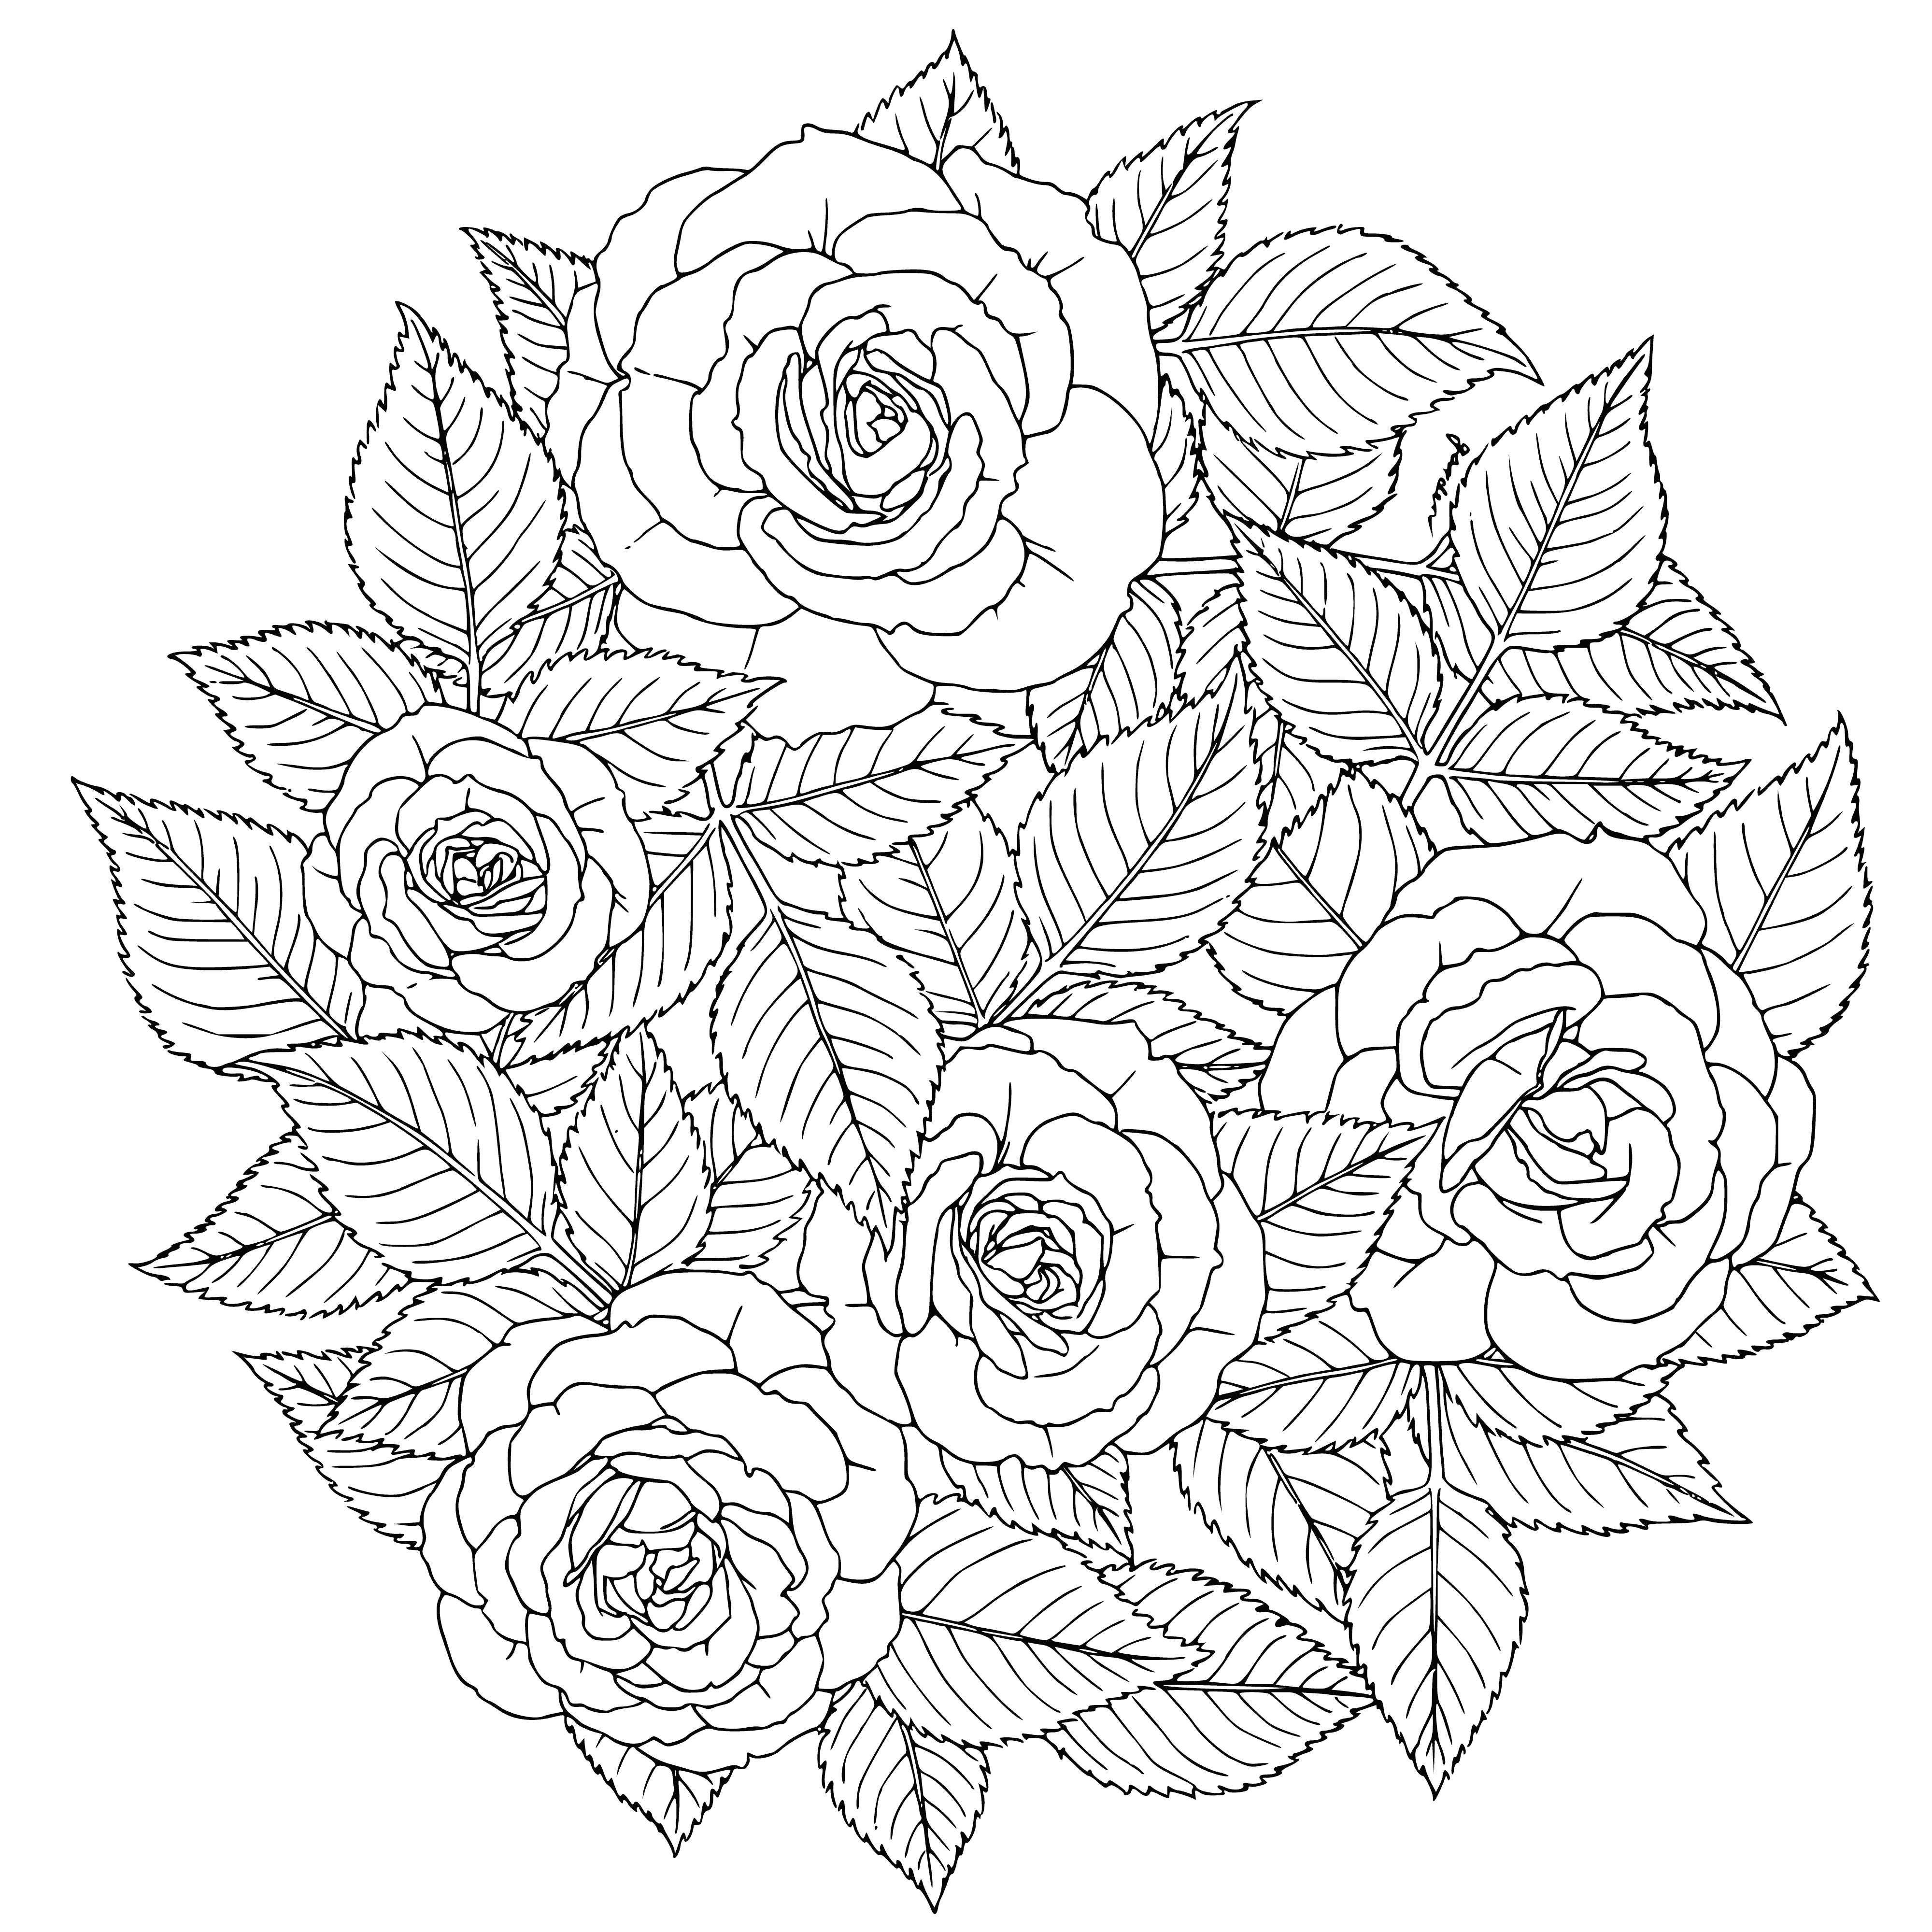 Roses coloring page